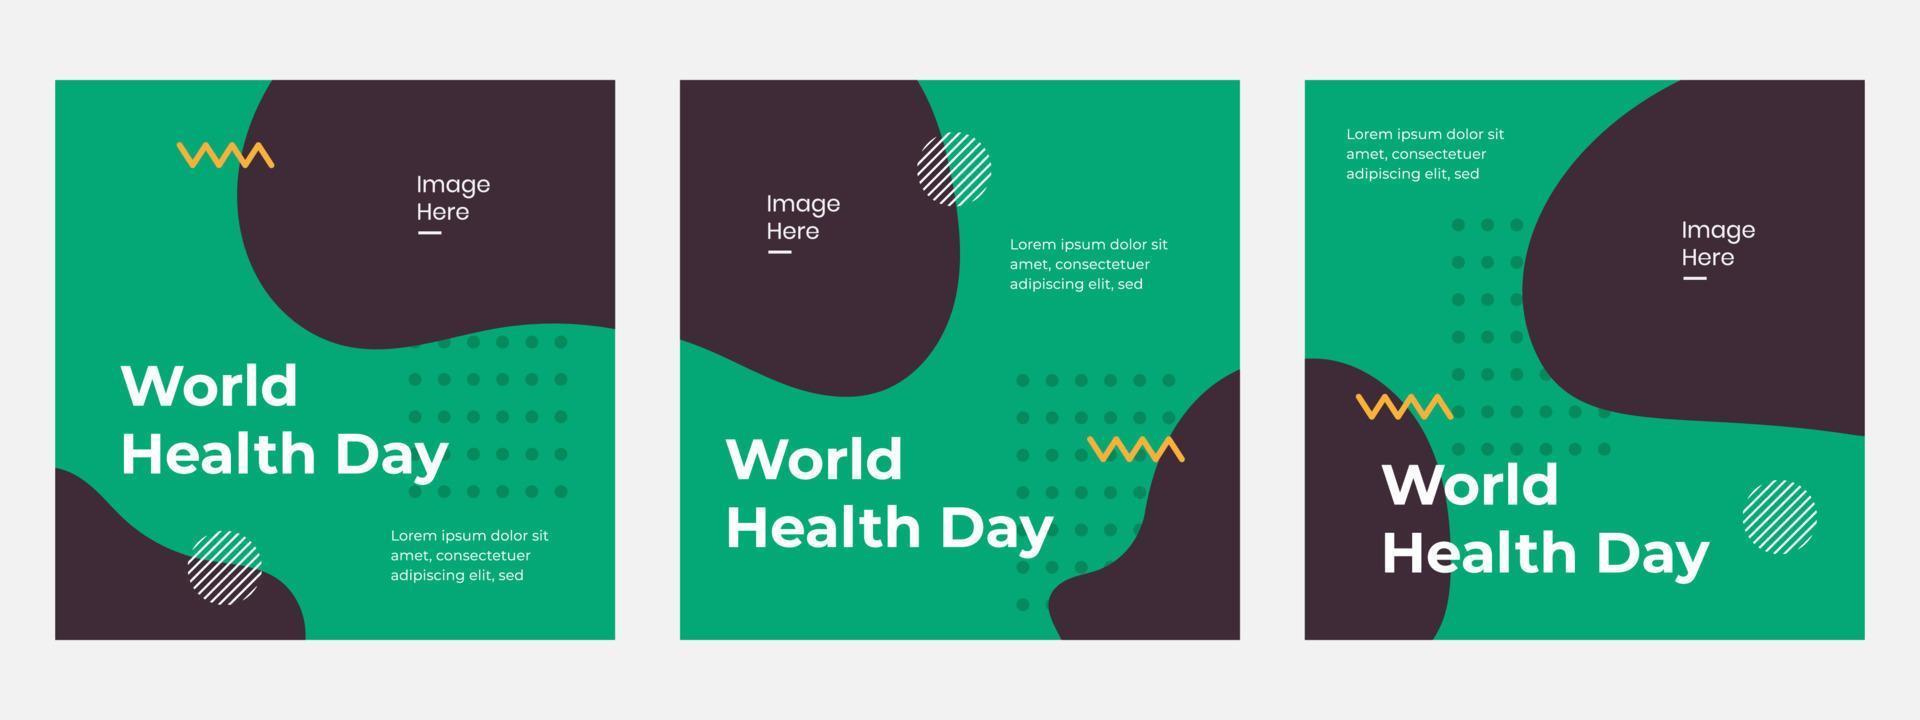 Template banner digital world health day. Suitable for content media social. Campaign design vector